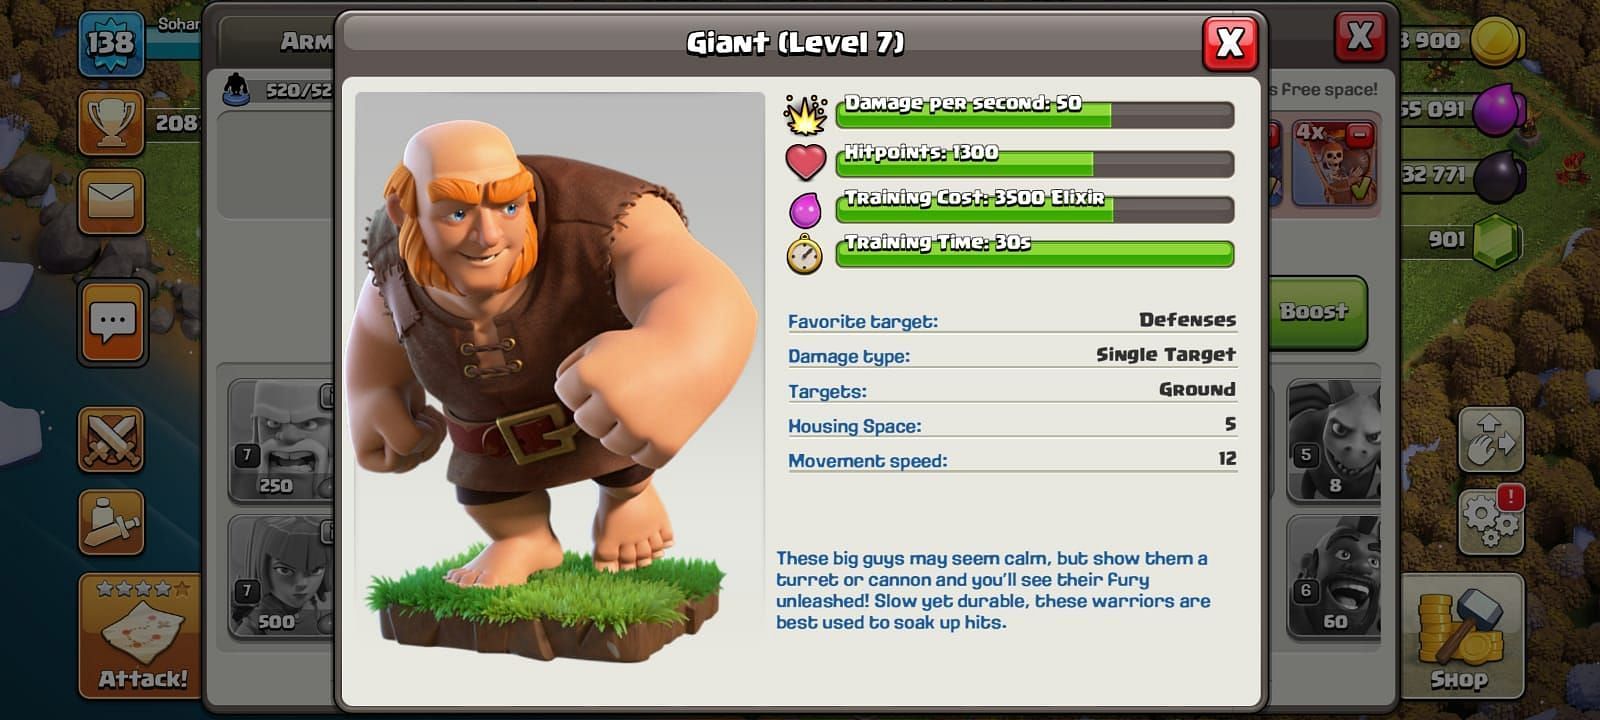 Clash of Clans Giant (Image via Clash of Clans)